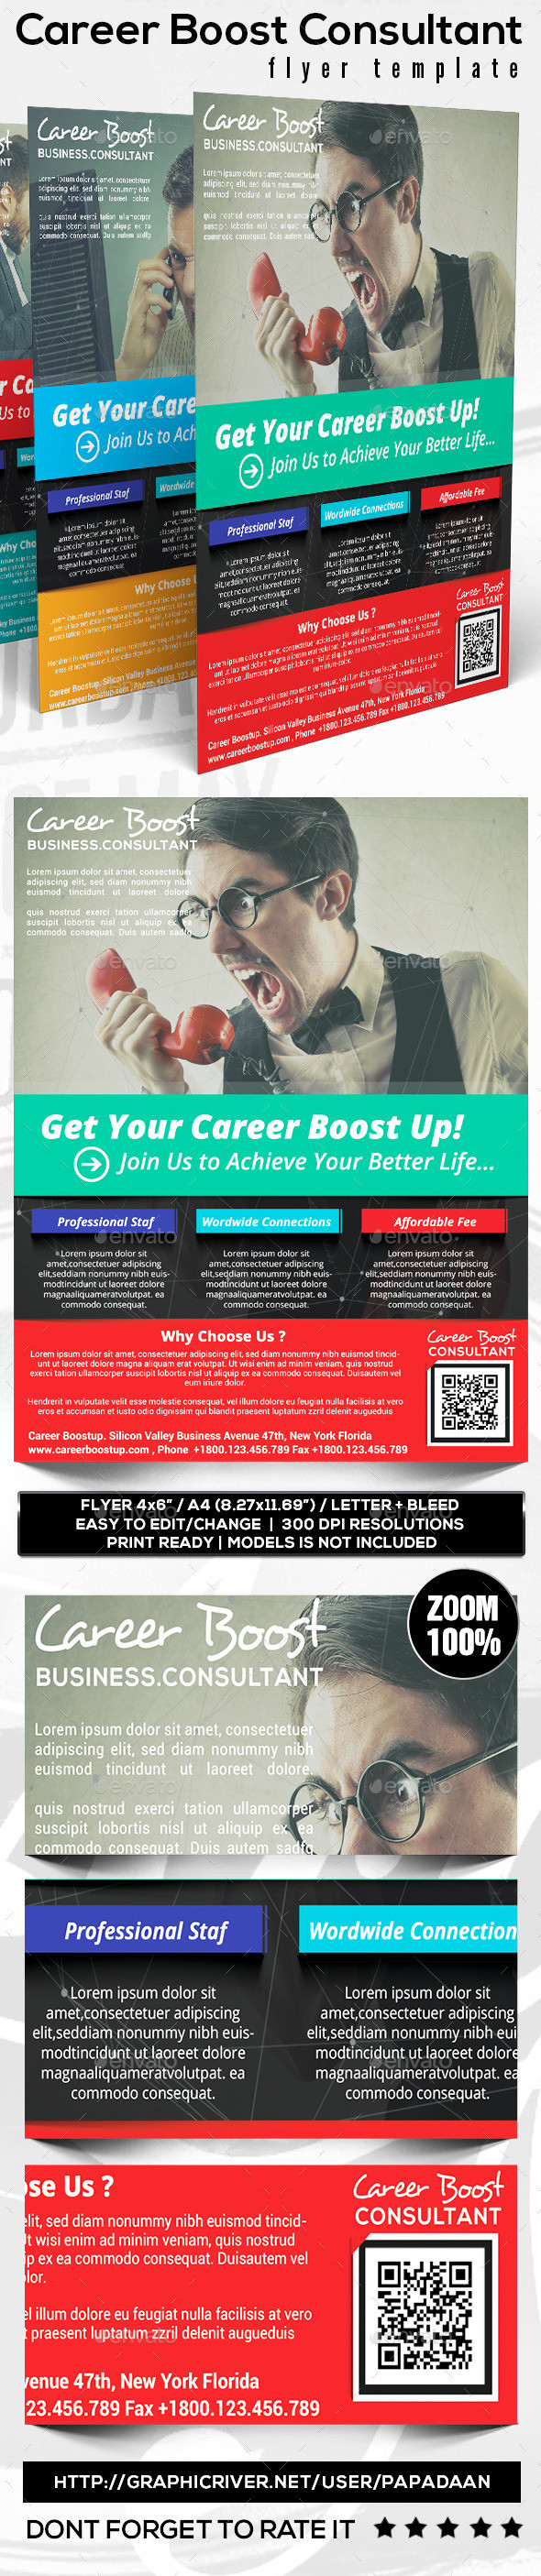 Career 20boost 20consultant 20flyer 20preview